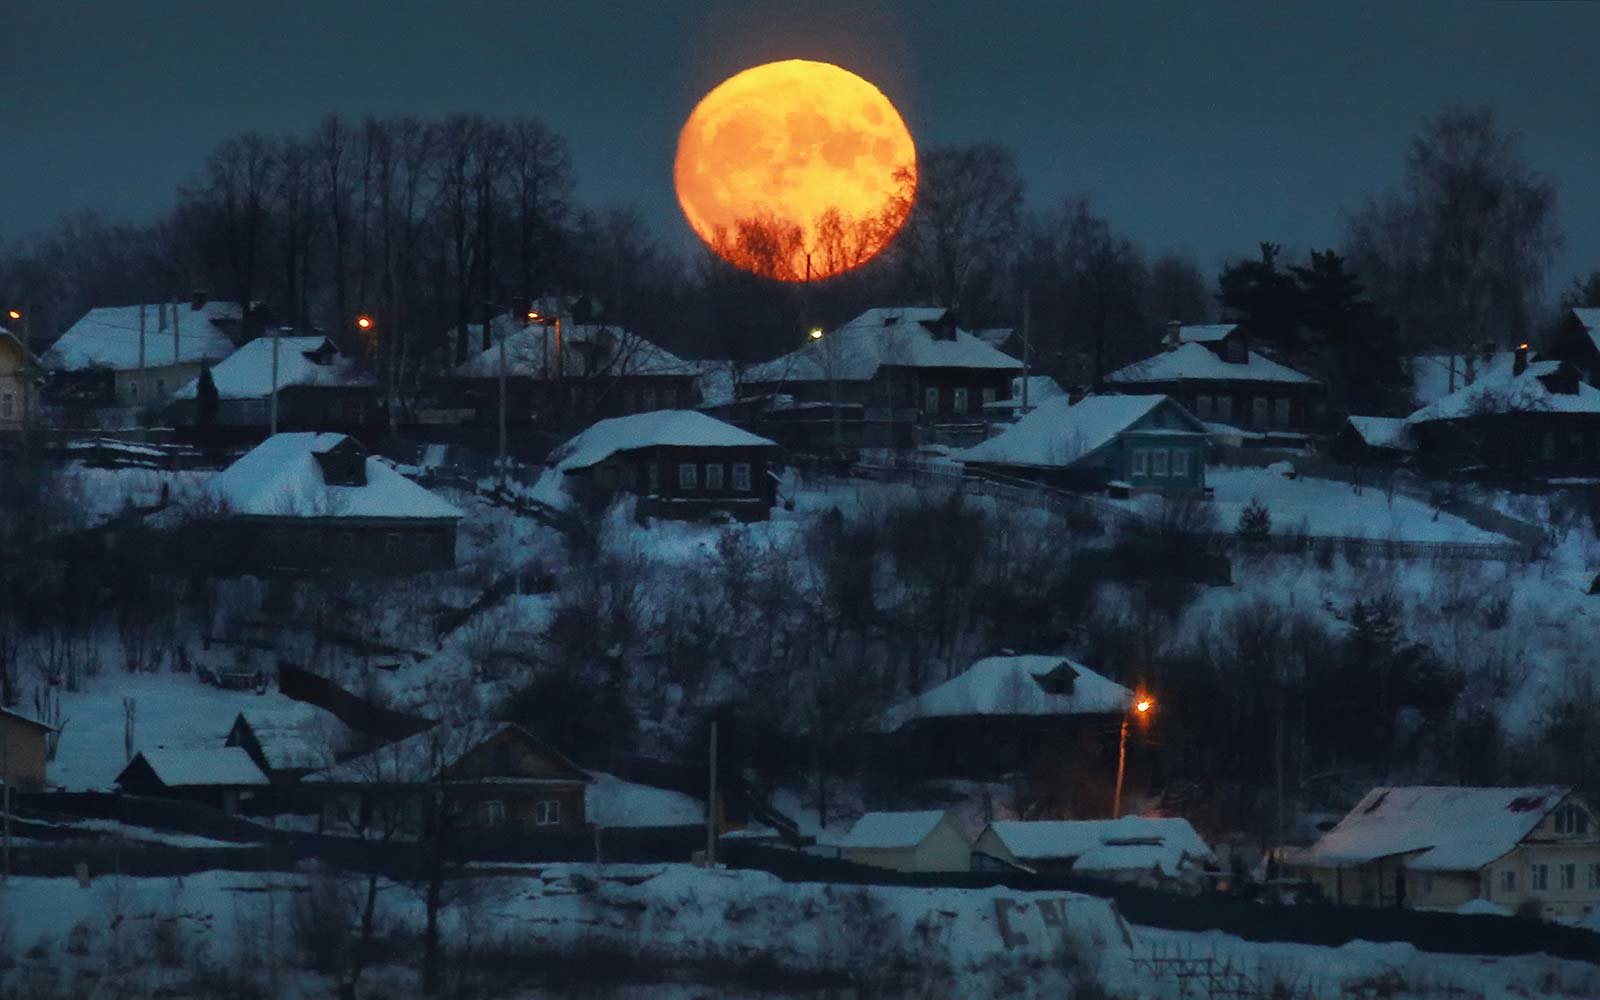 “It came and mesmerized us”: The view of ‘Super Blue Blood Moon’ on Wednesday